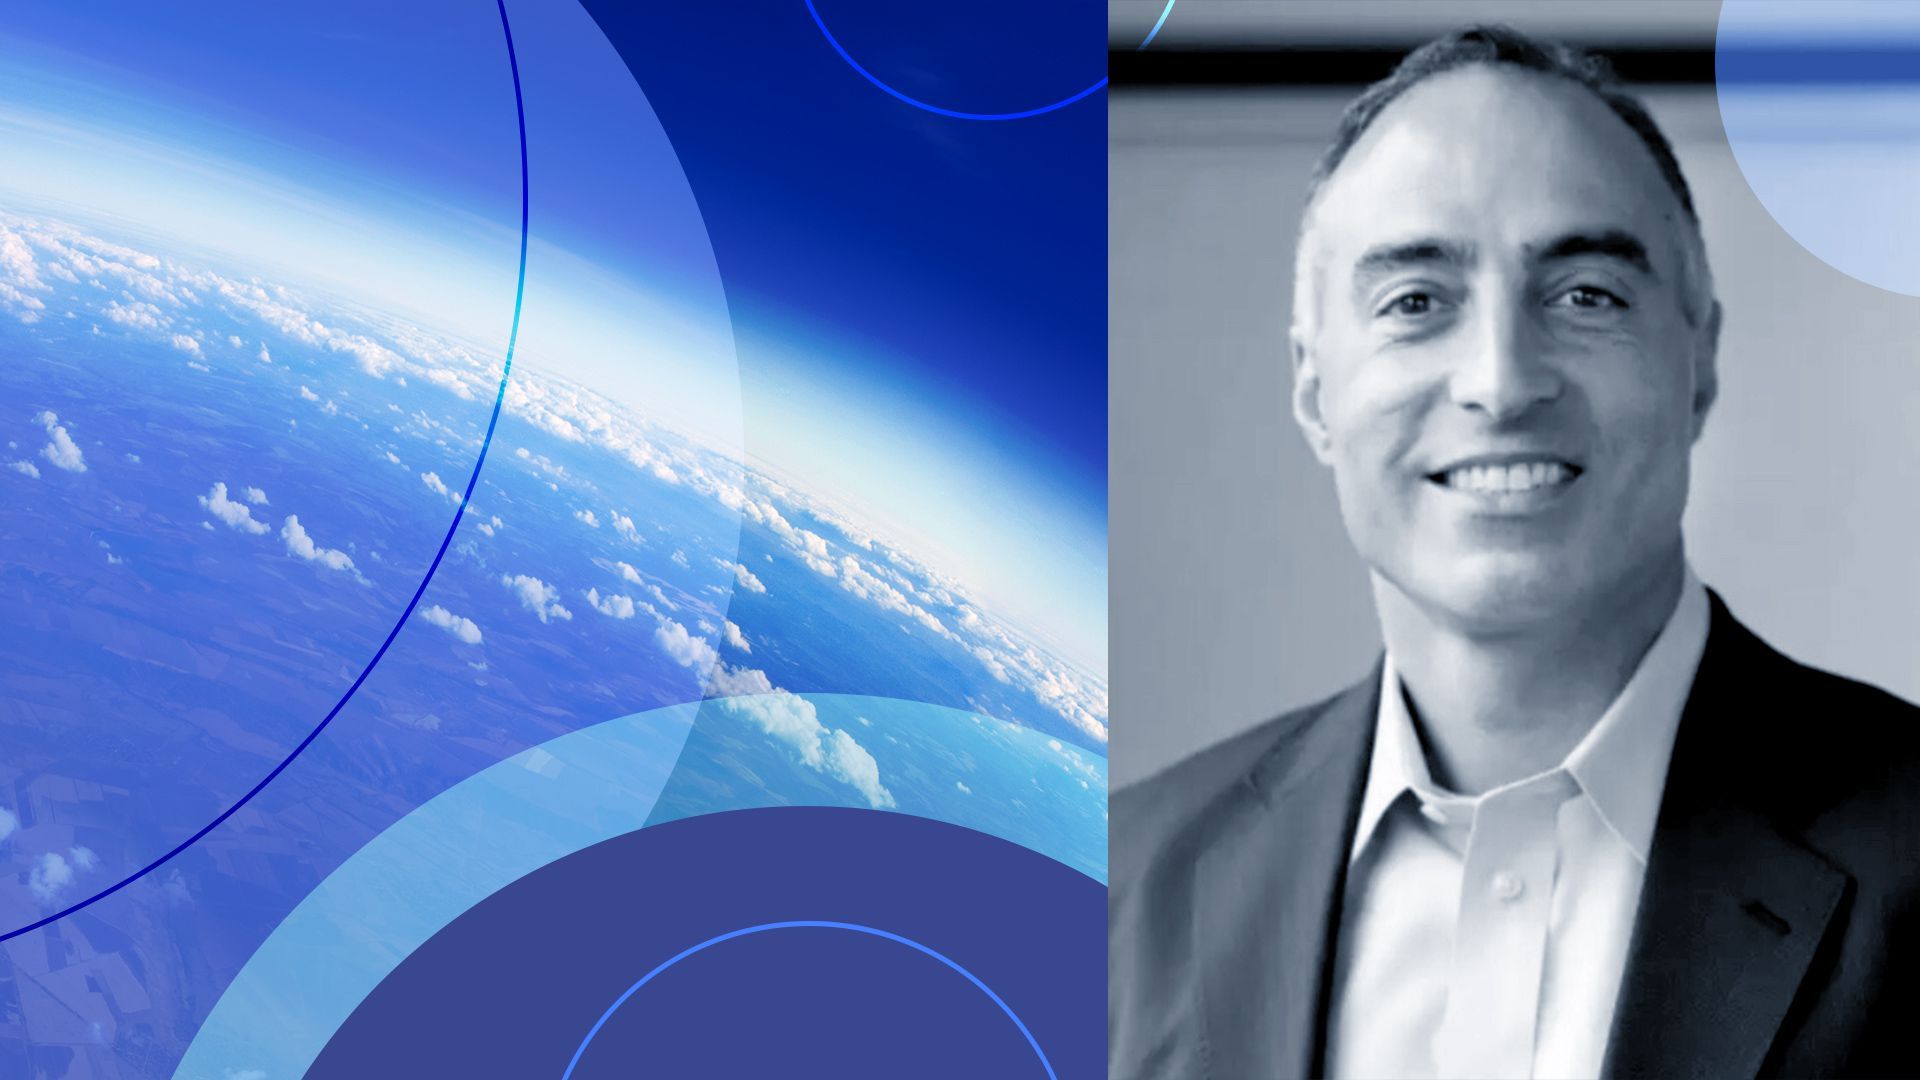 Photo illustration of Paul Nahi with an image of the earth's atmosphere and abstract shapes.